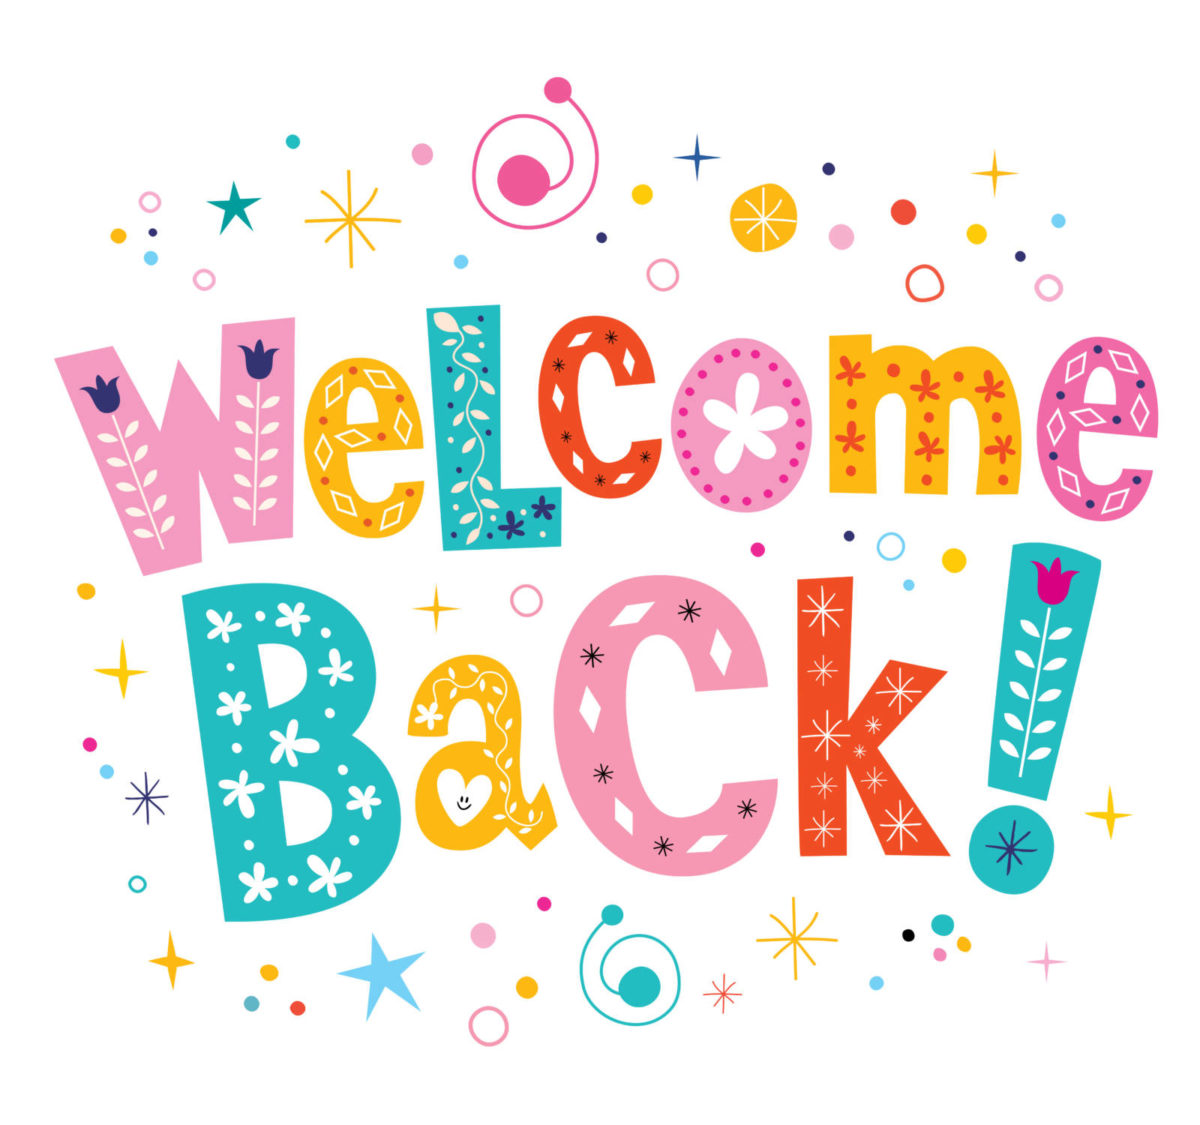 Welcome Back! – Knightsridge Early Years Centre